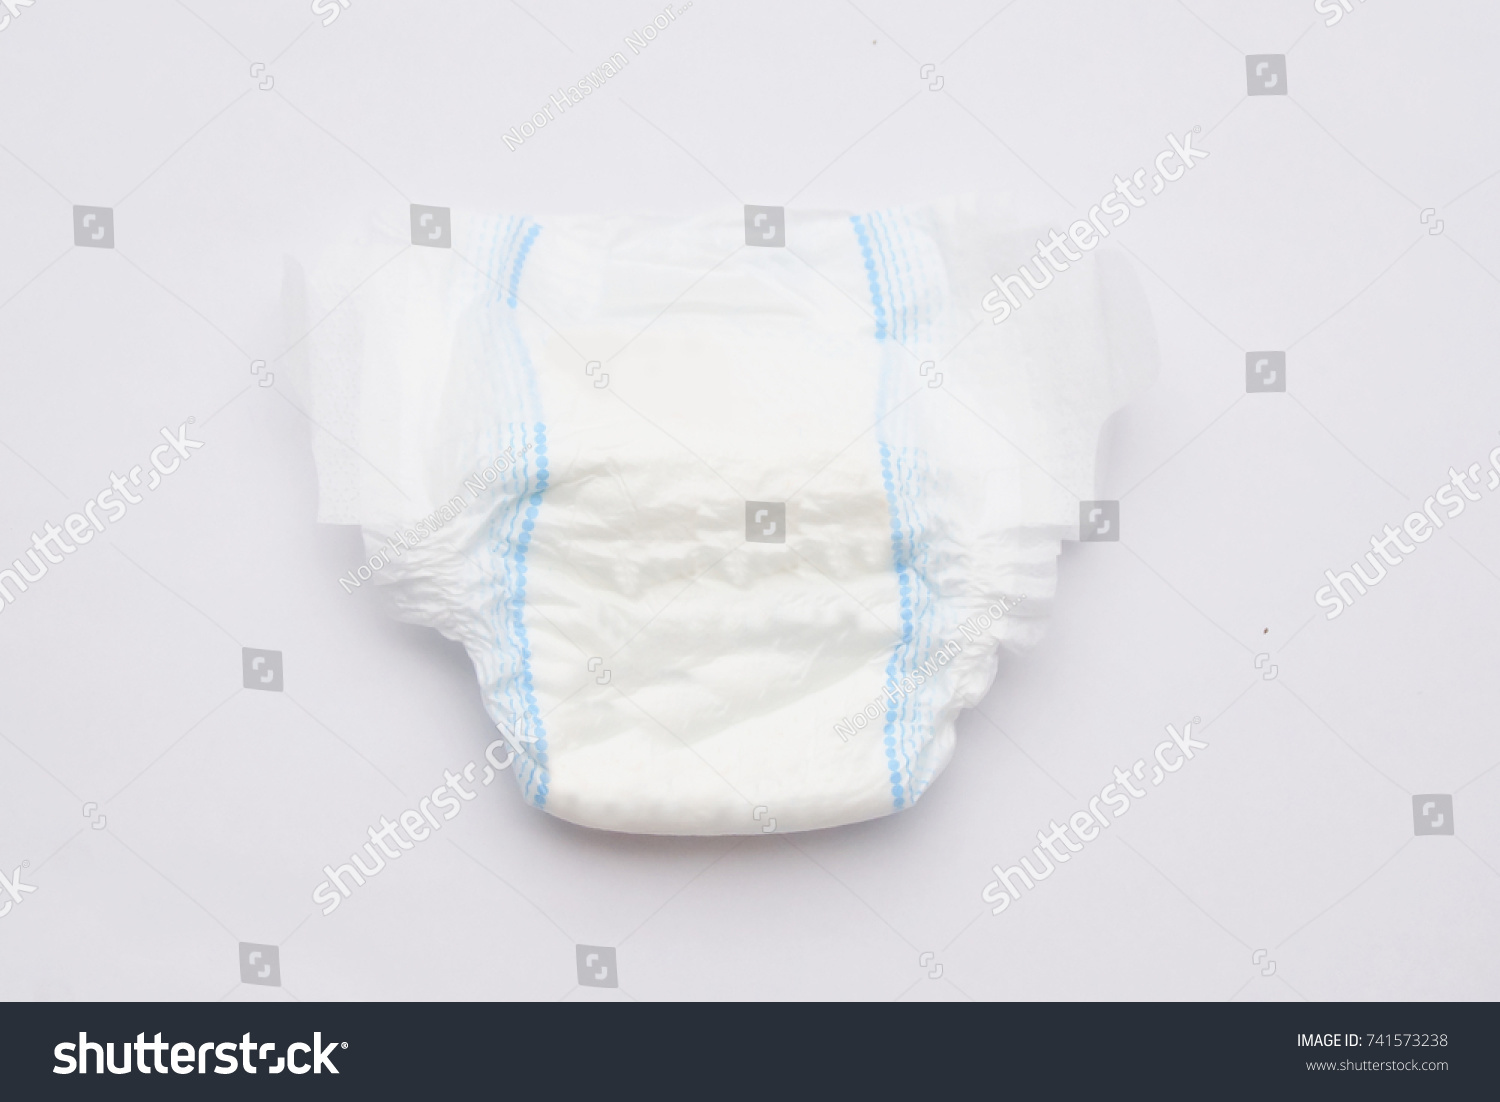 Disposable Baby Diapers Over White Background #741573238